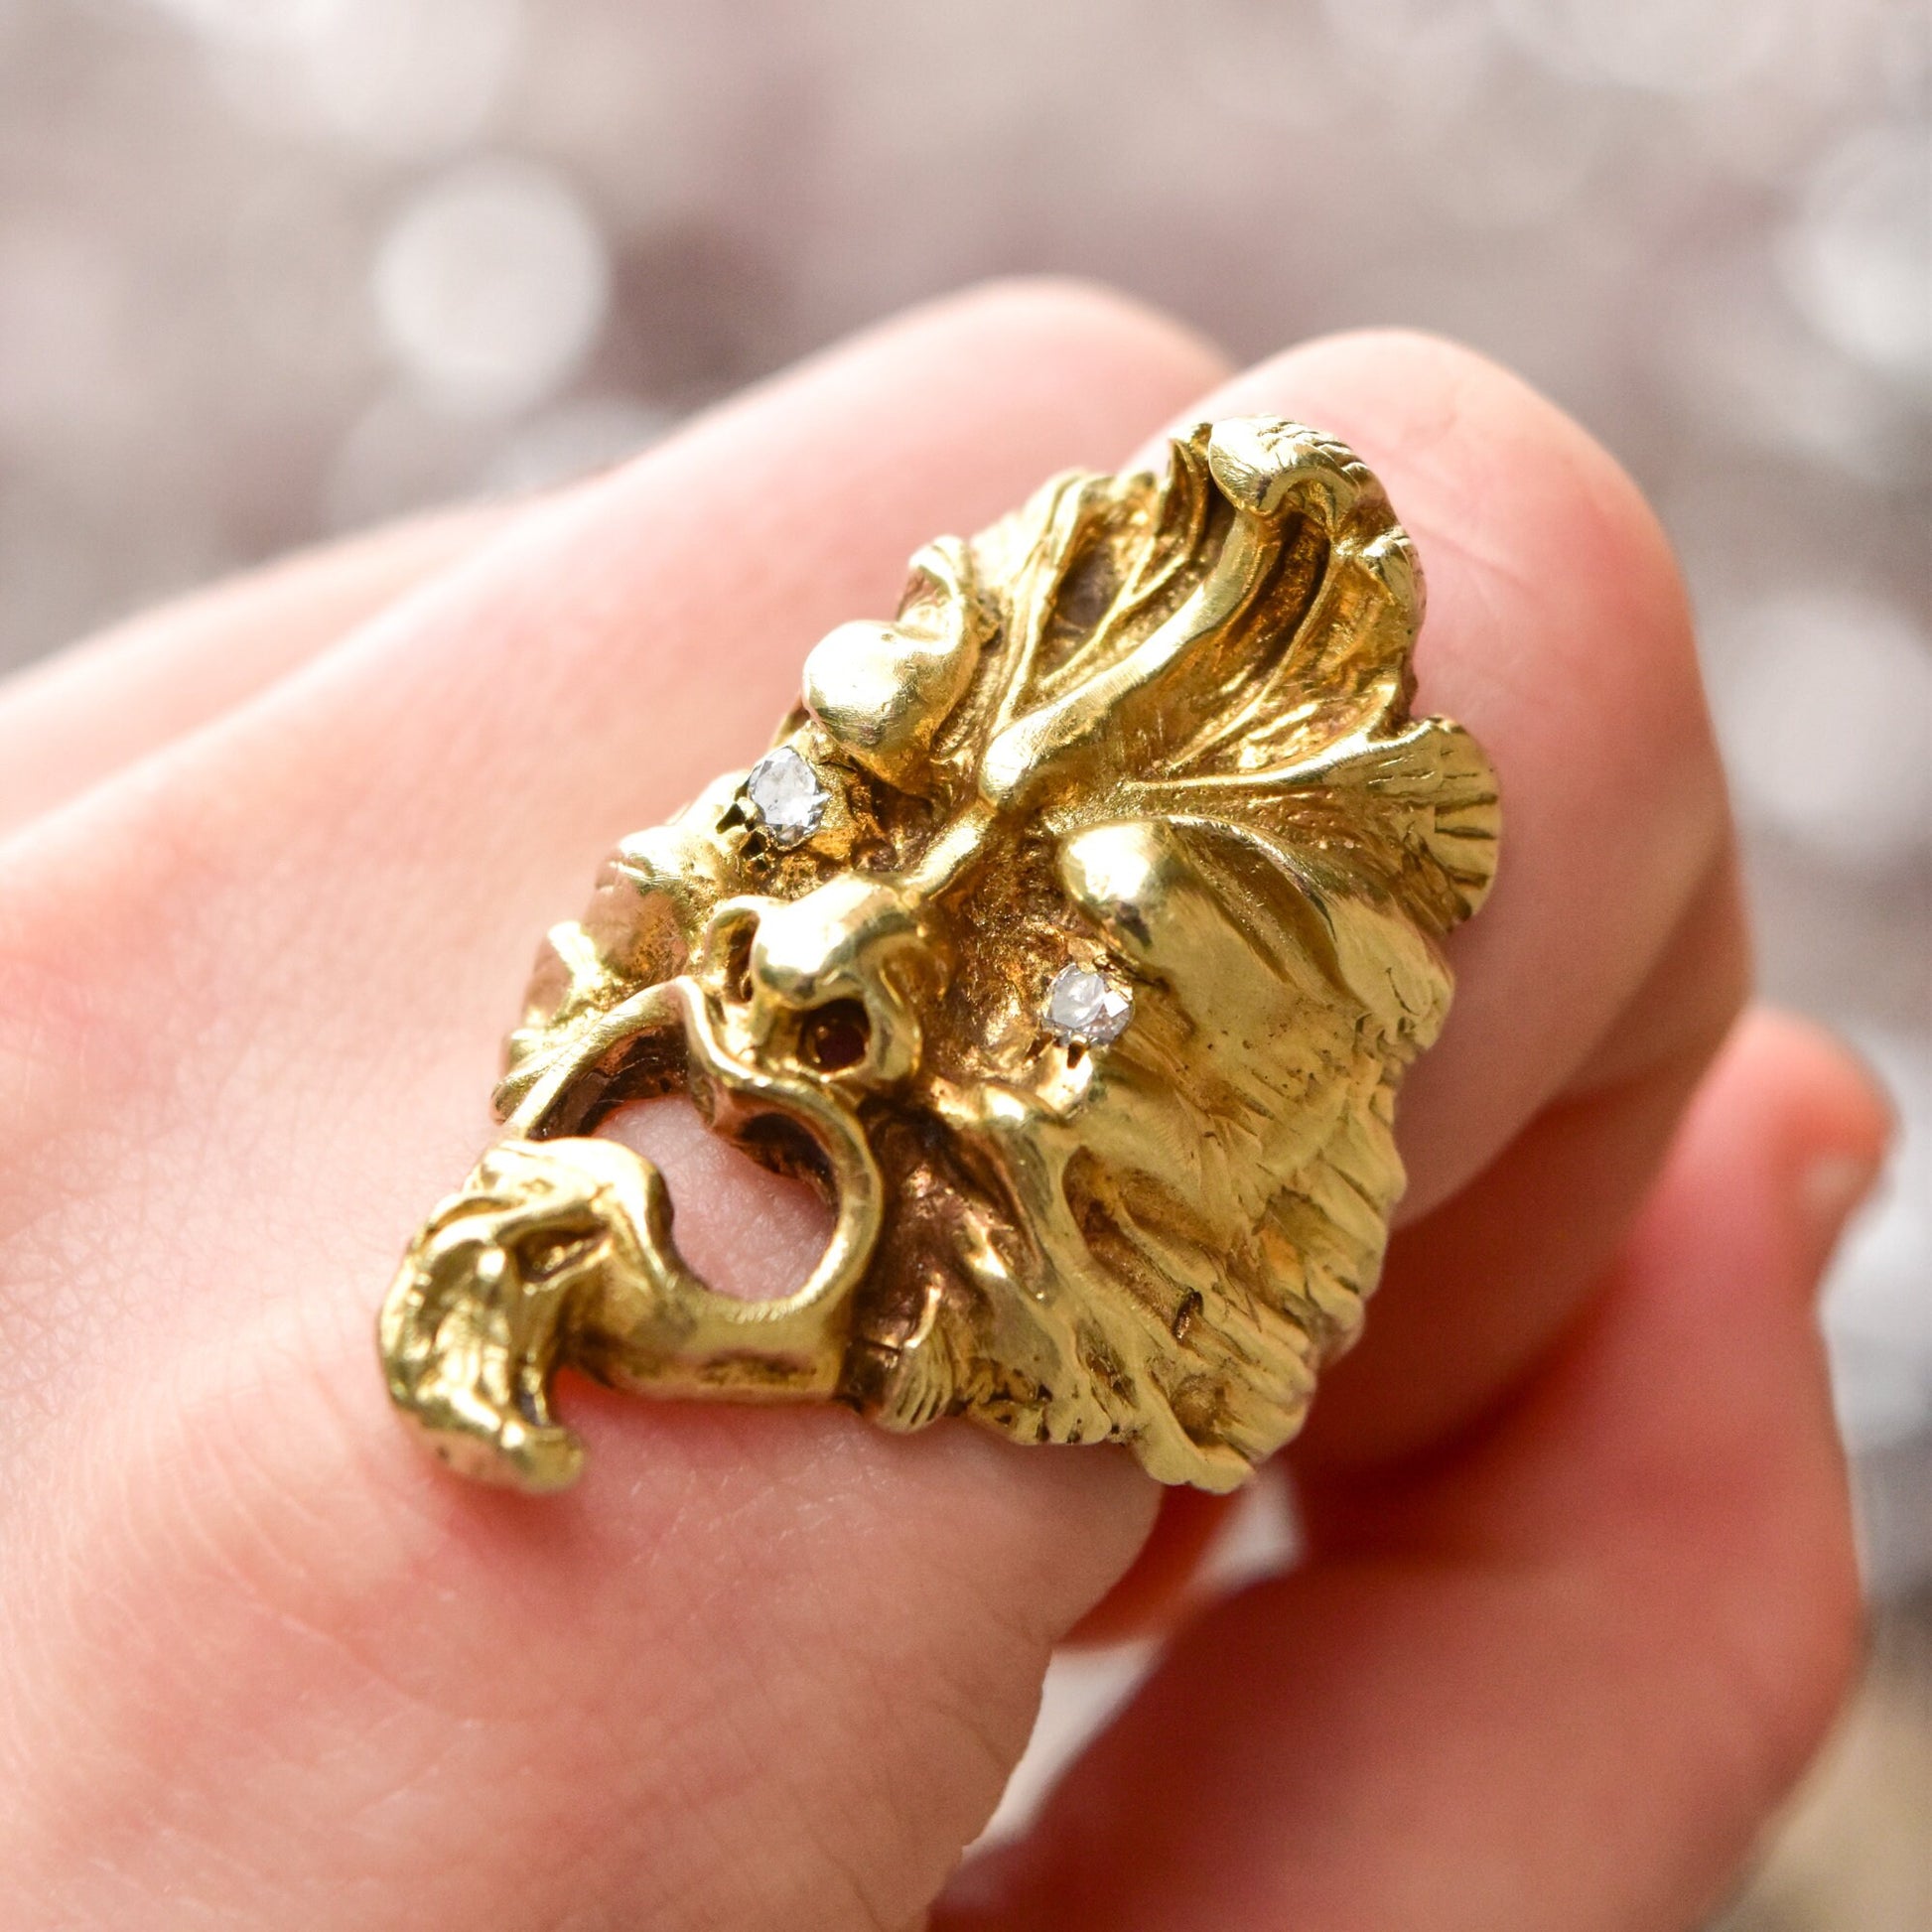 Gold sculpted face ring with diamond eyes held in a hand, close-up view showing intricate detailing of the textured mask design with sparkling diamond accents.